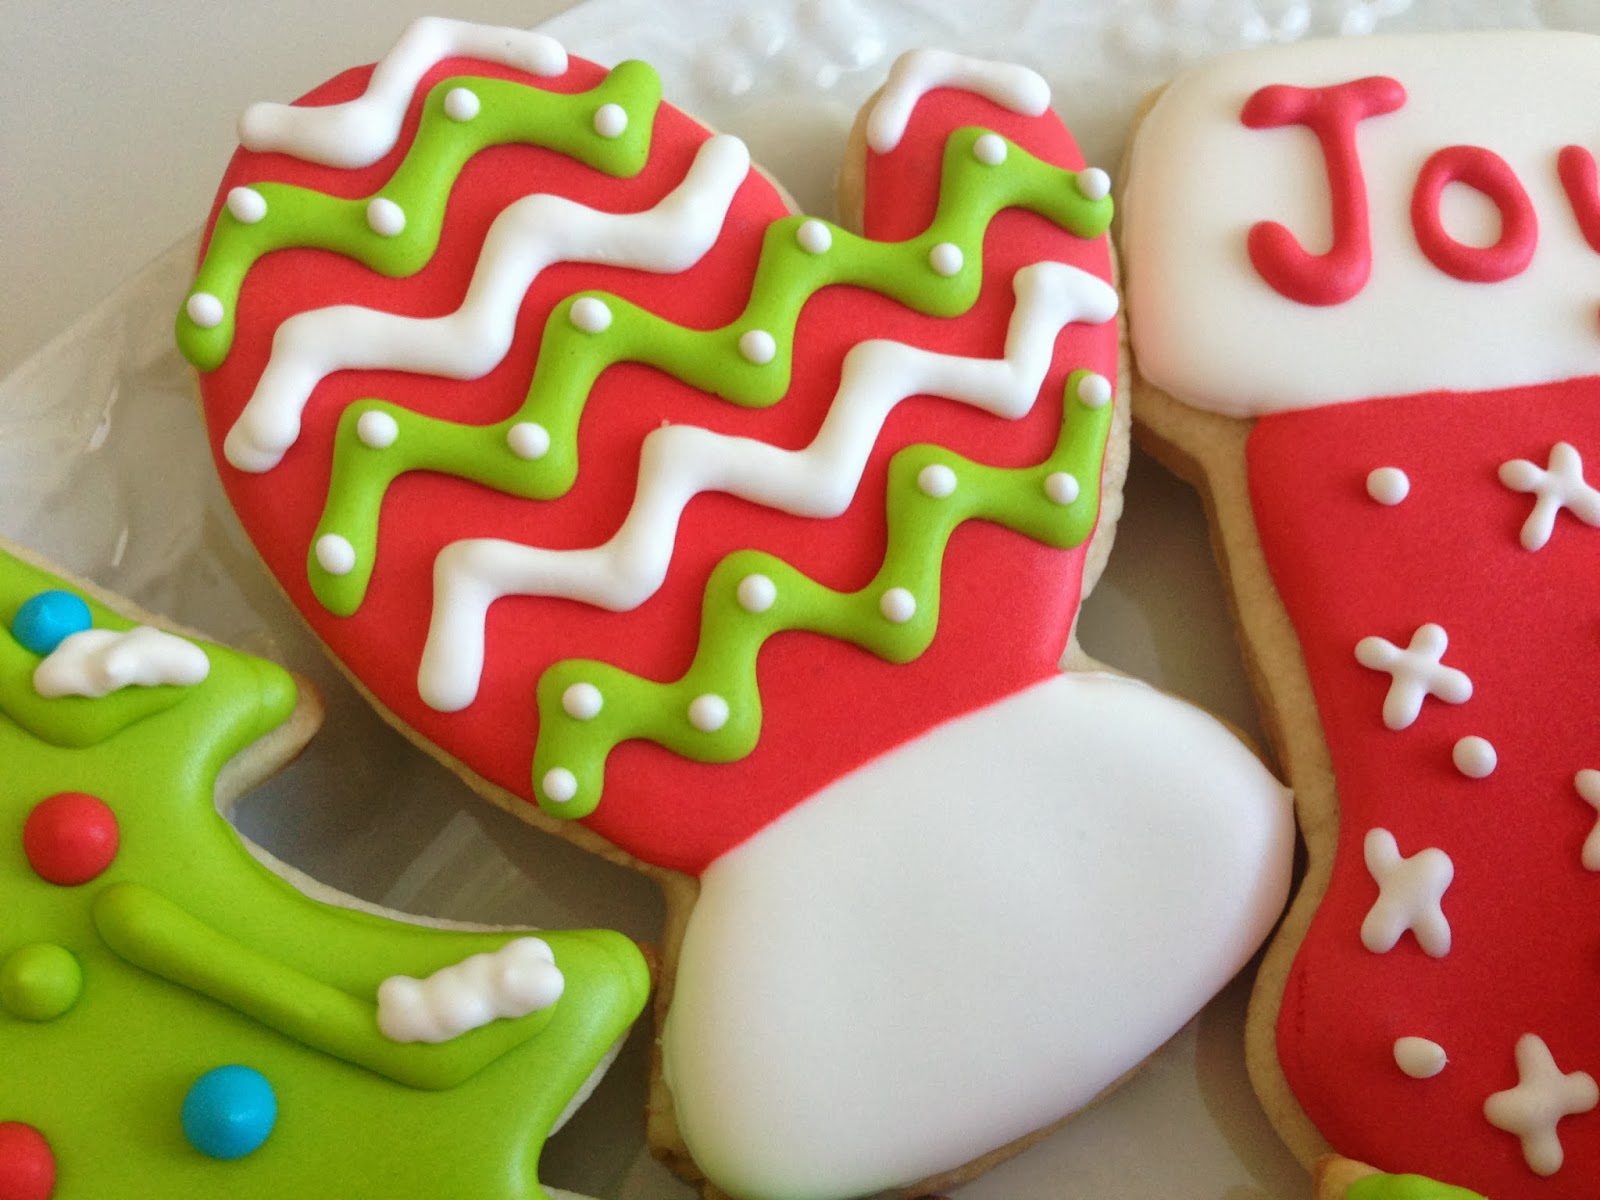 monograms & cake: Christmas Cut-Out Sugar Cookies with Royal Icing